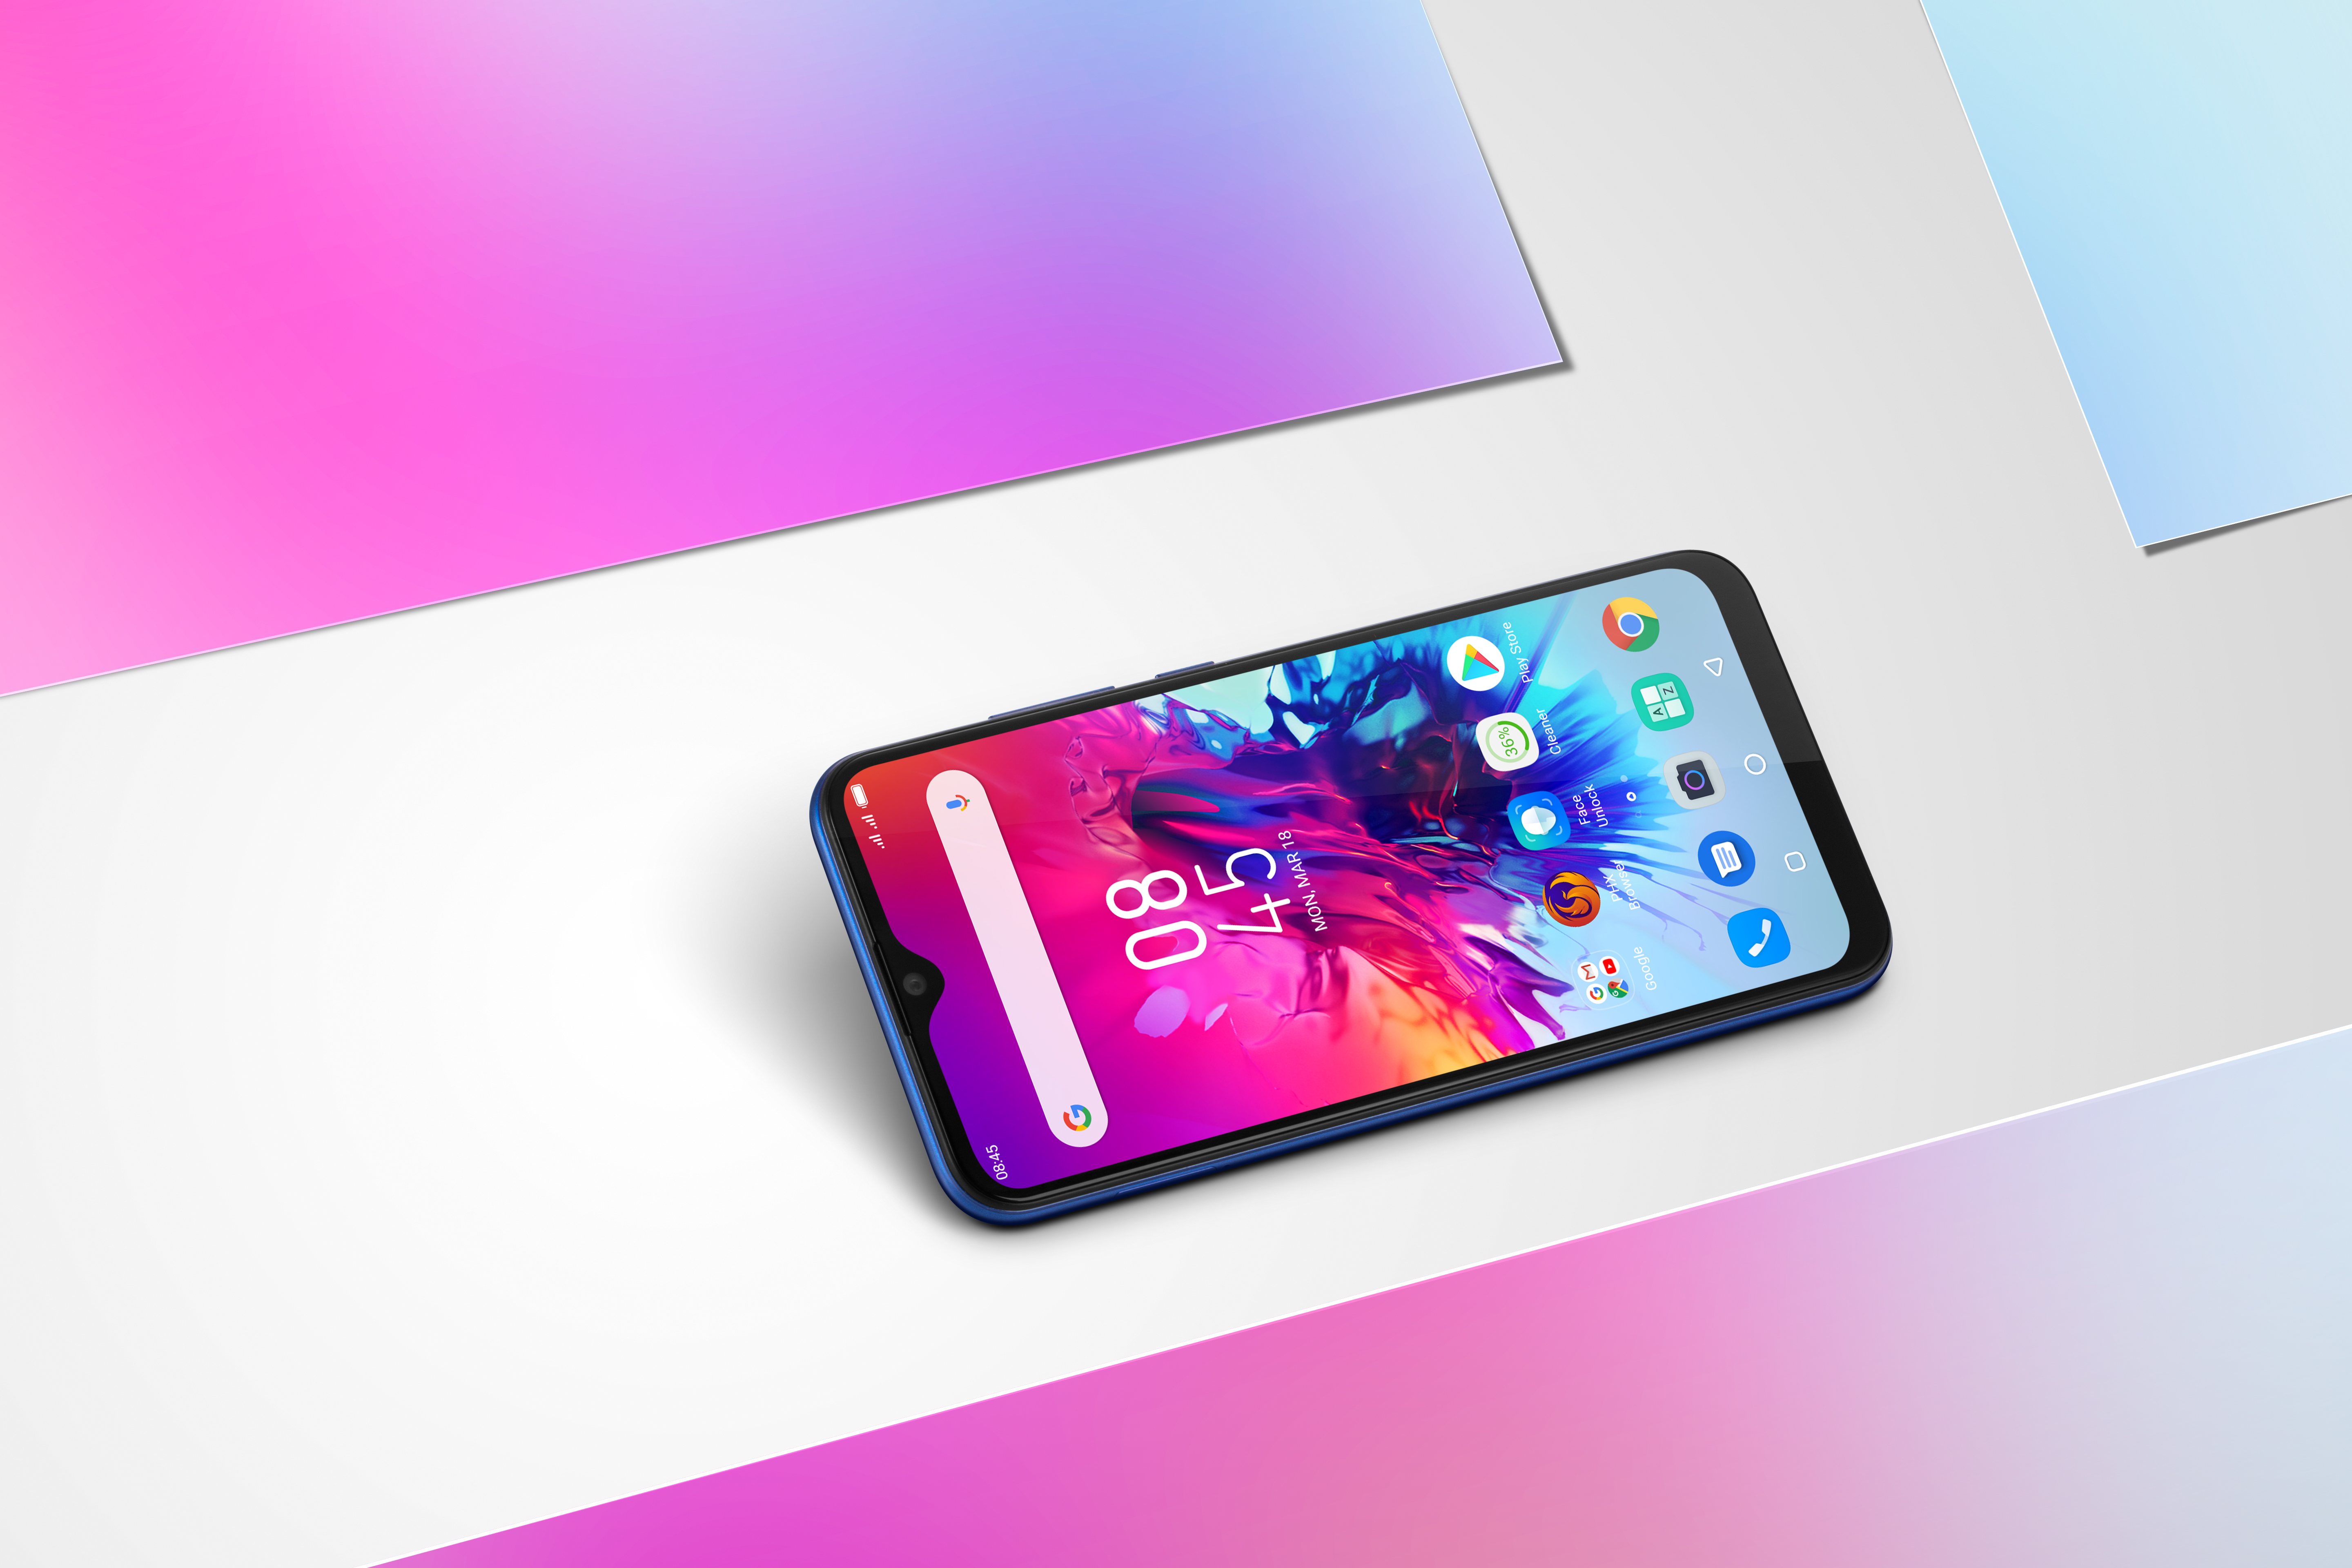 Infinix Plans to Introduce the SMART 3 PLUS; A Budget Smartphone with Triple Cameras, Great Looks and a Water-drop Notch!